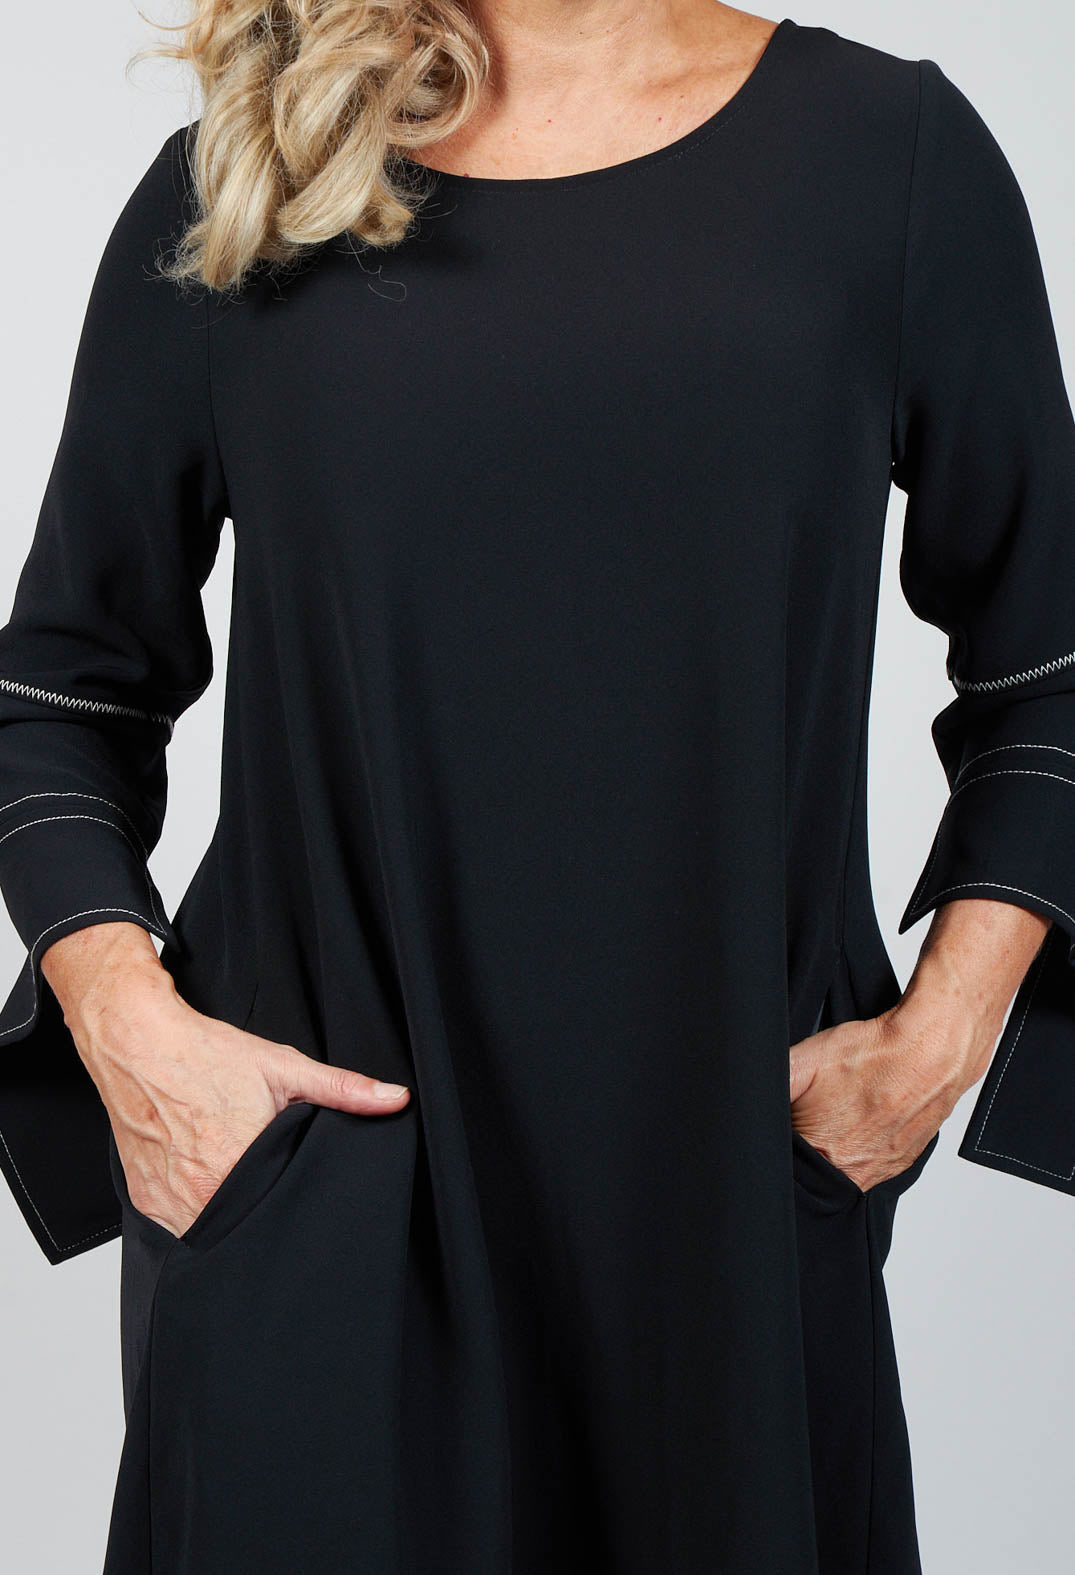 midi shift dress in black with sleeve detailing